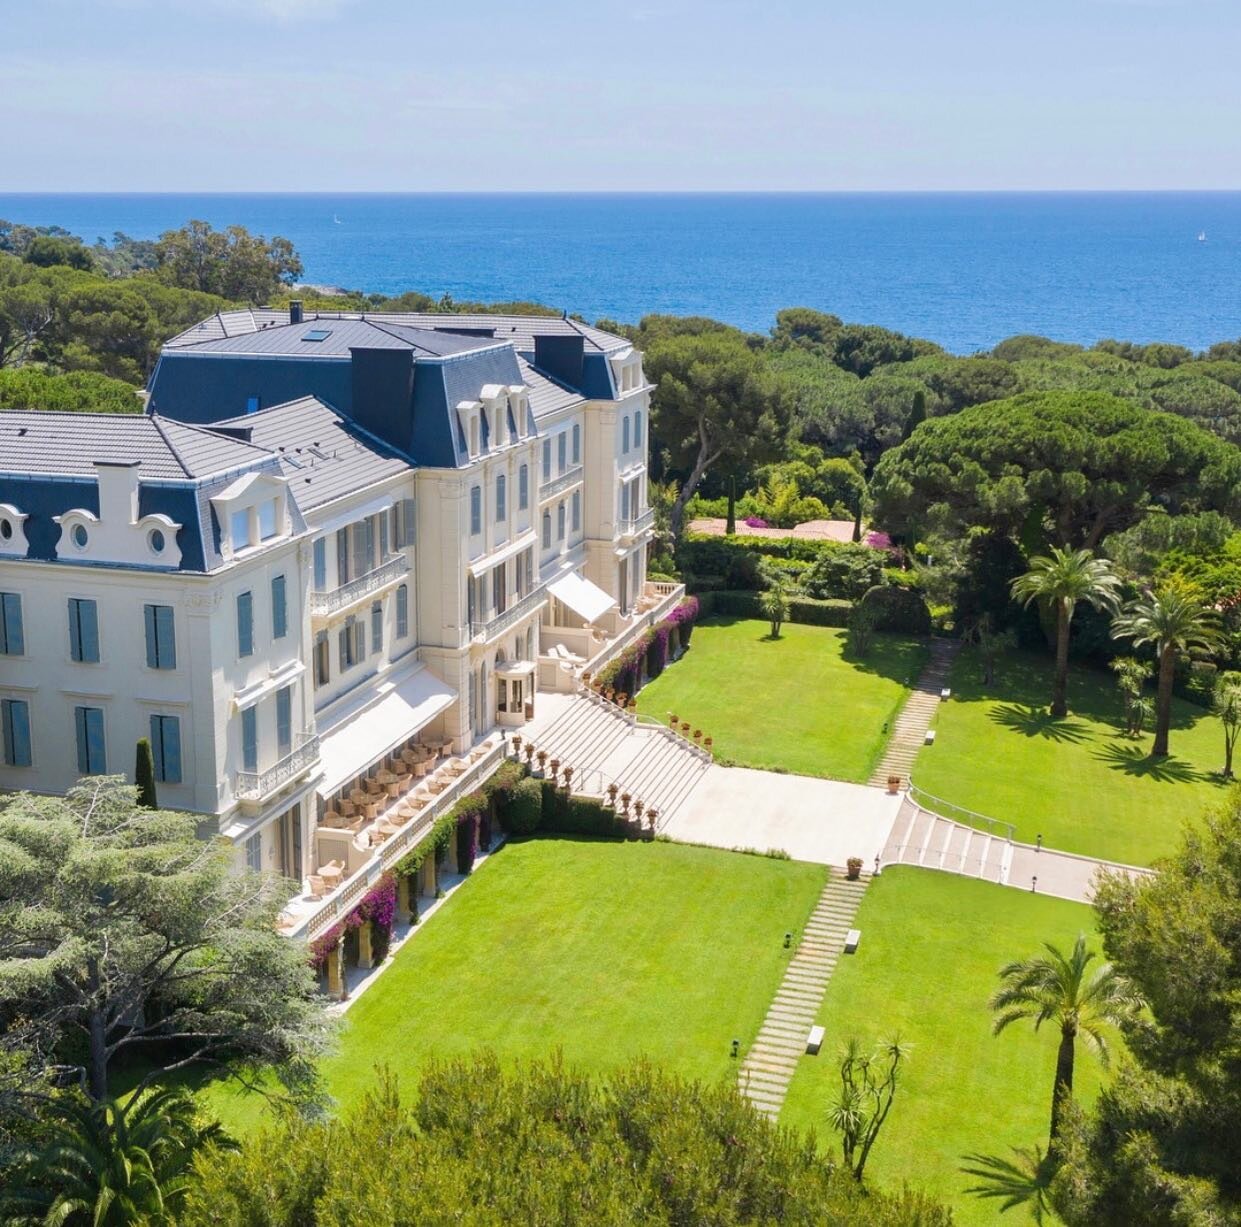 Both the Cannes Film Festival and the Monaco Grand Prix just wrapped, so we have the South of France on the mind. And when we think of the South of France, we daydream about the H&ocirc;tel du Cap-Eden-Roc in Antibes. ✨⁣
&bull;⁣
&bull;⁣
&bull;⁣
#sout